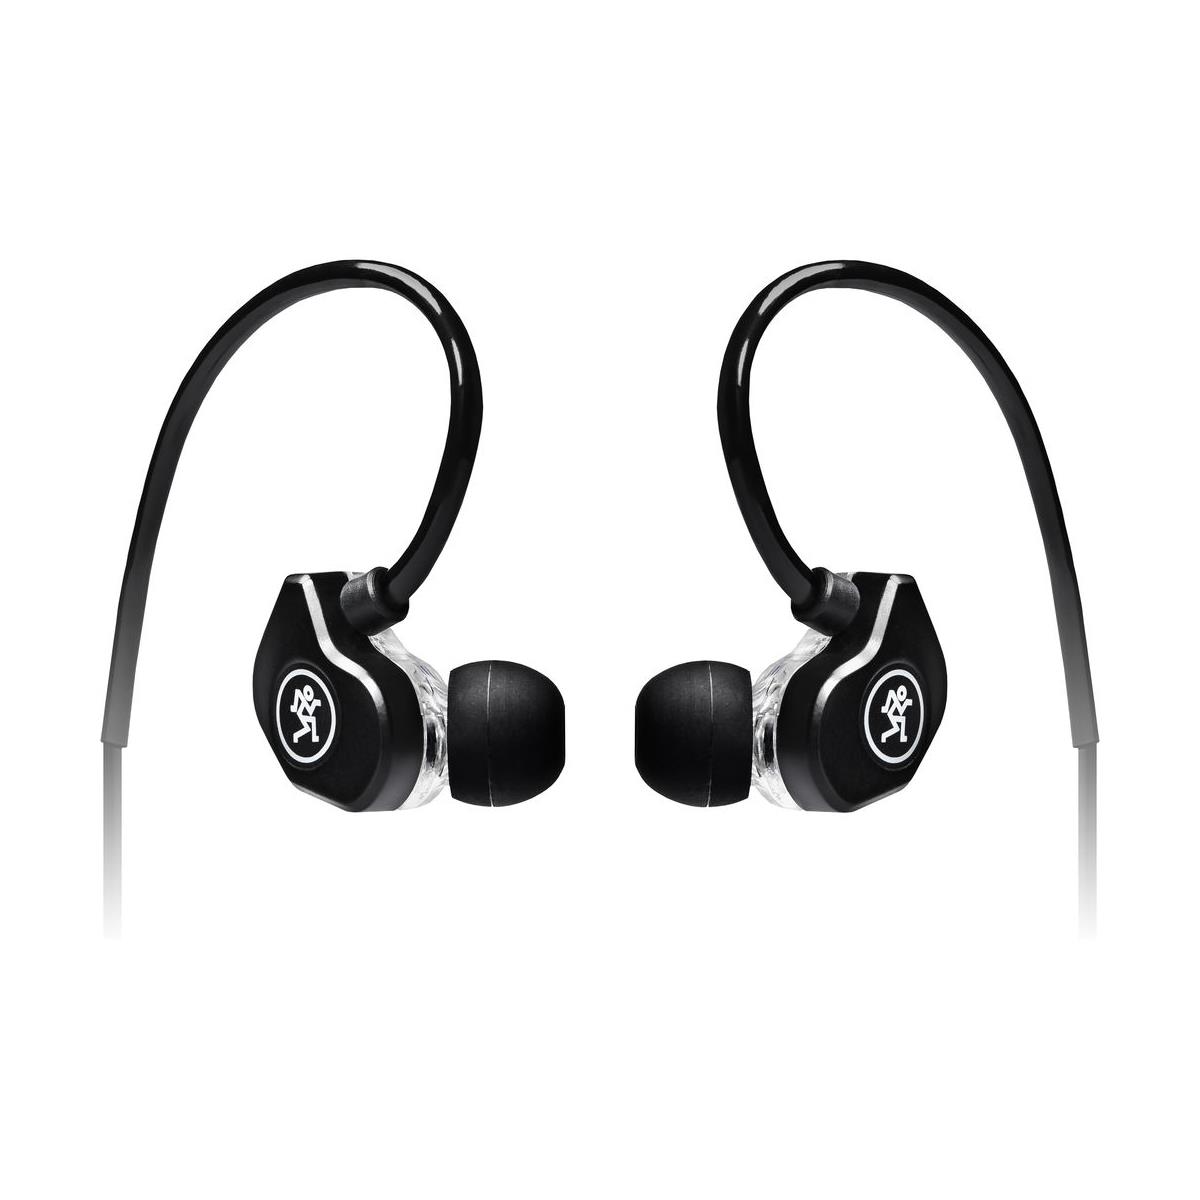 

Mackie CR-Buds+ Dual Dynamic Driver Professional Fit Earphones with Mic/Control